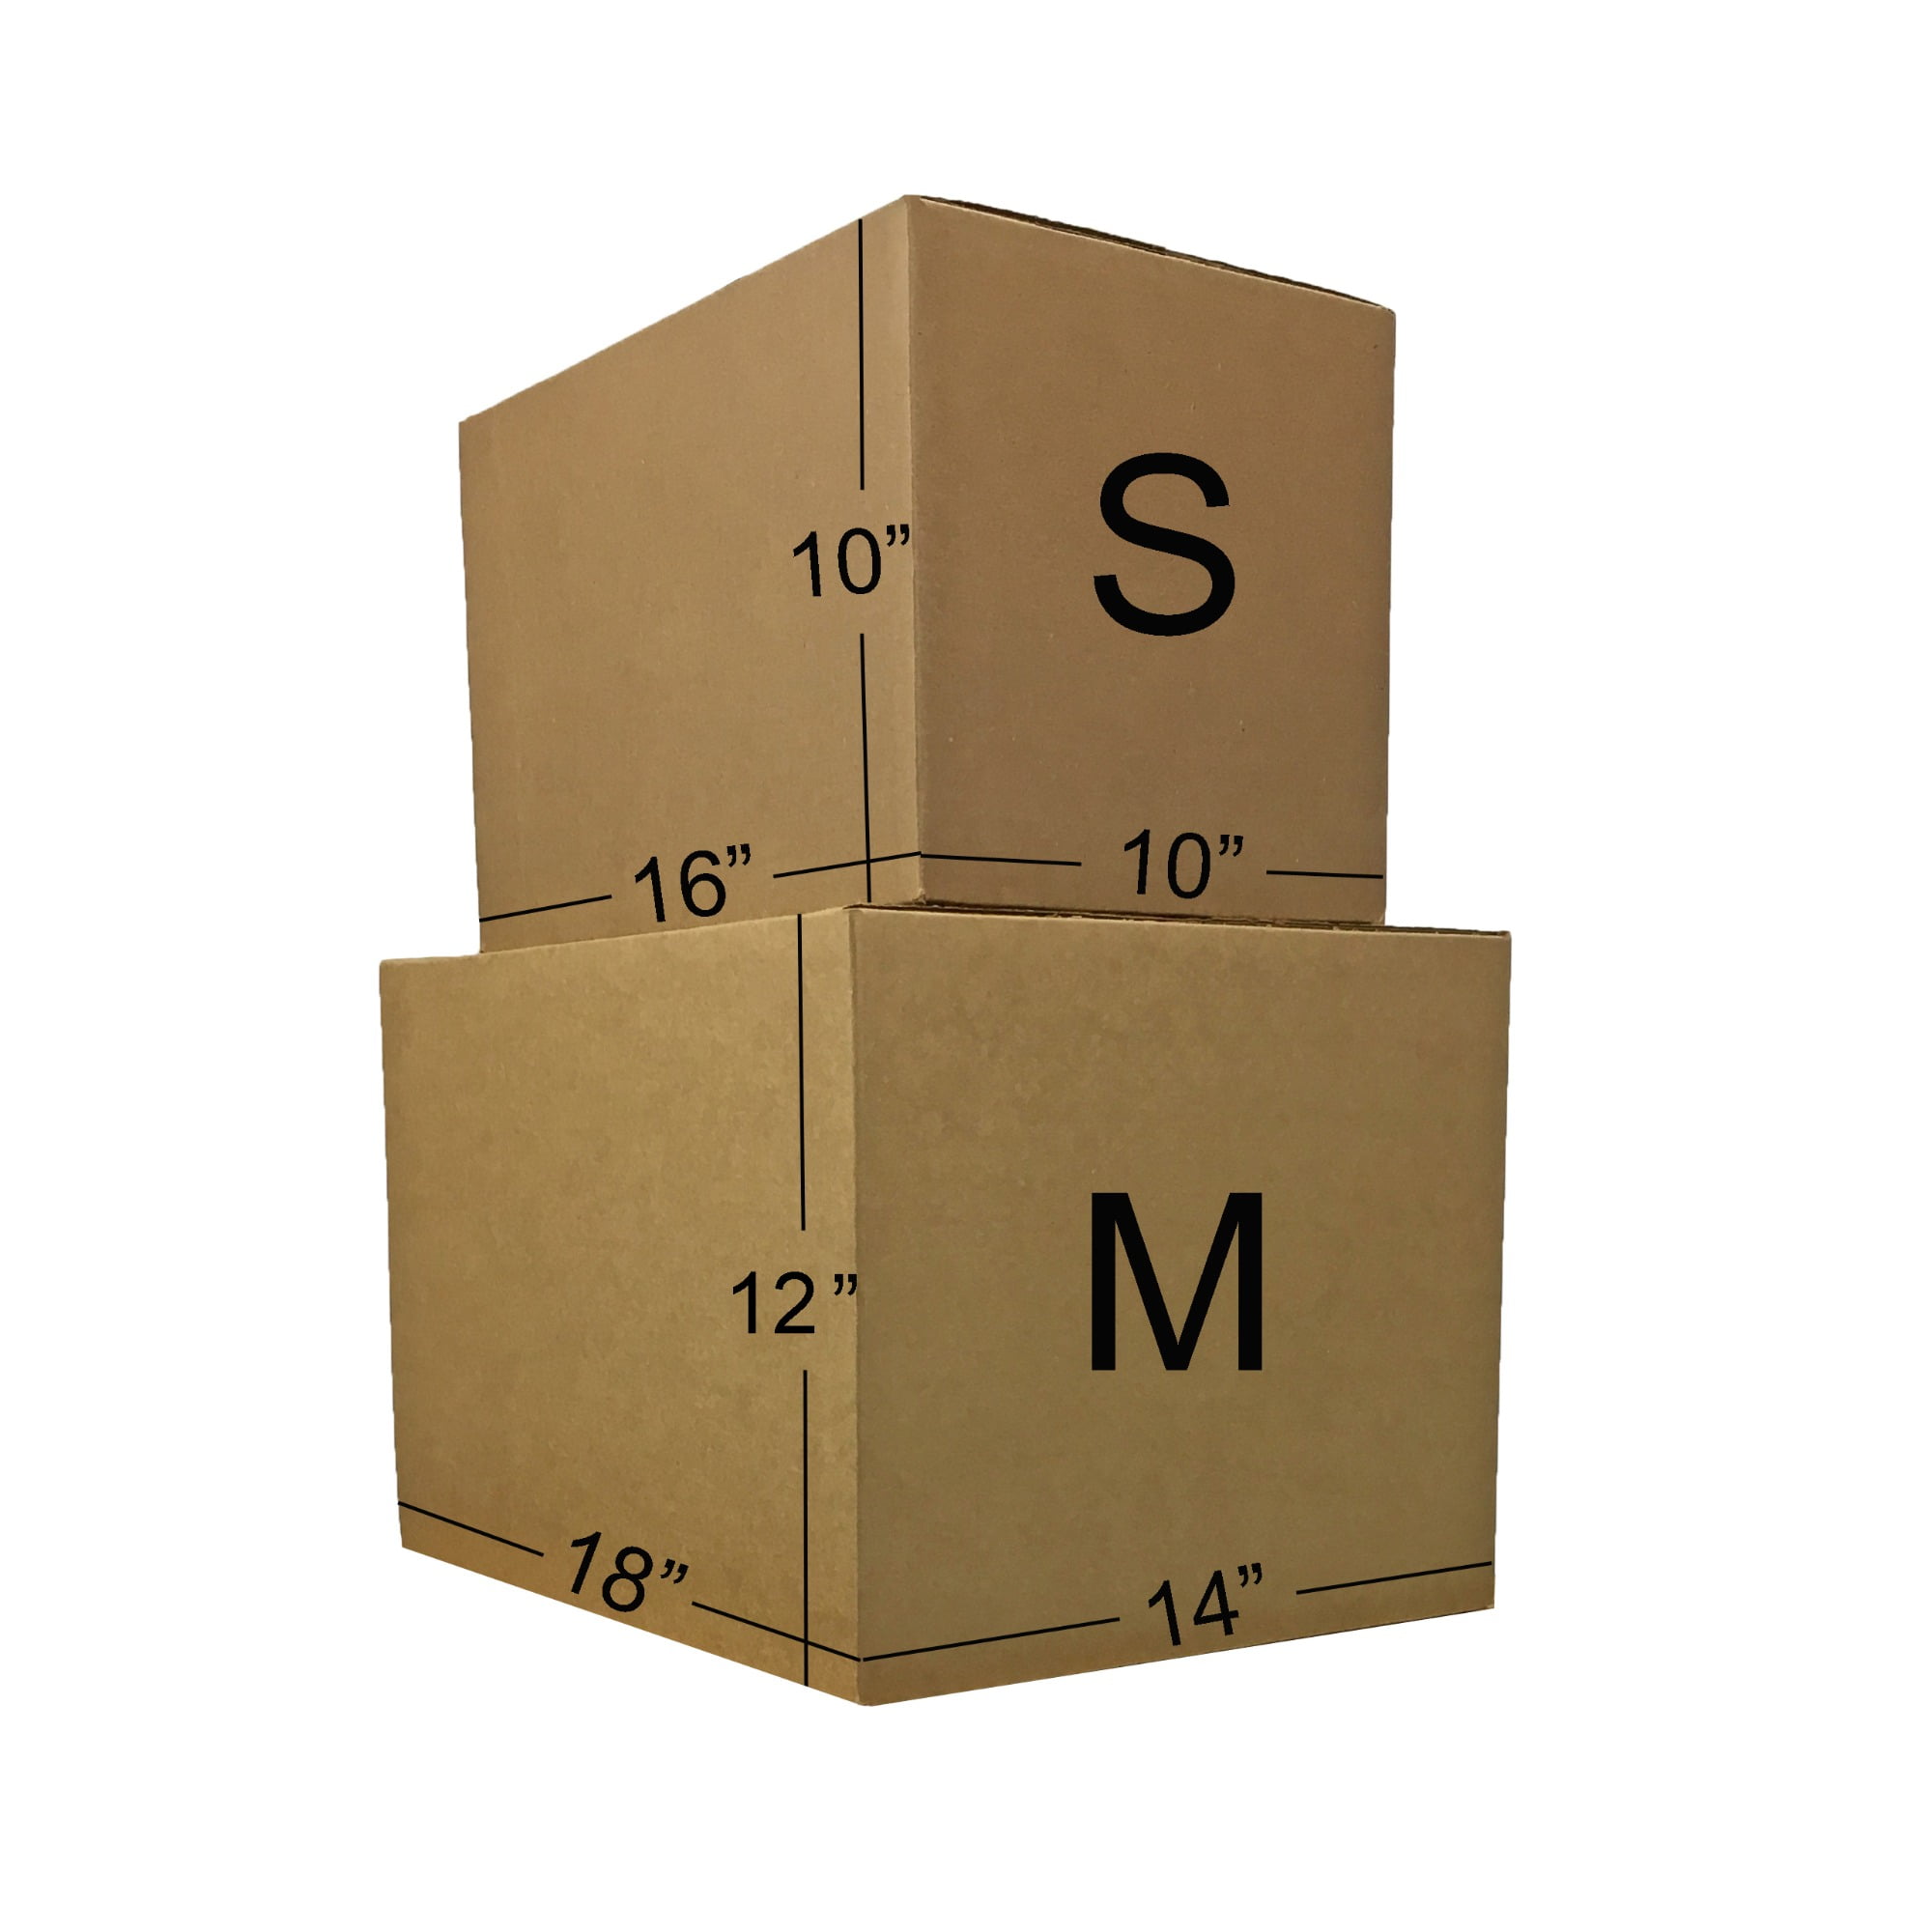 Pen+Gear Small Extra Strength Recycled Moving Boxes, 17in.Lx11in.Wx13inH,  Kraft, 15 Count